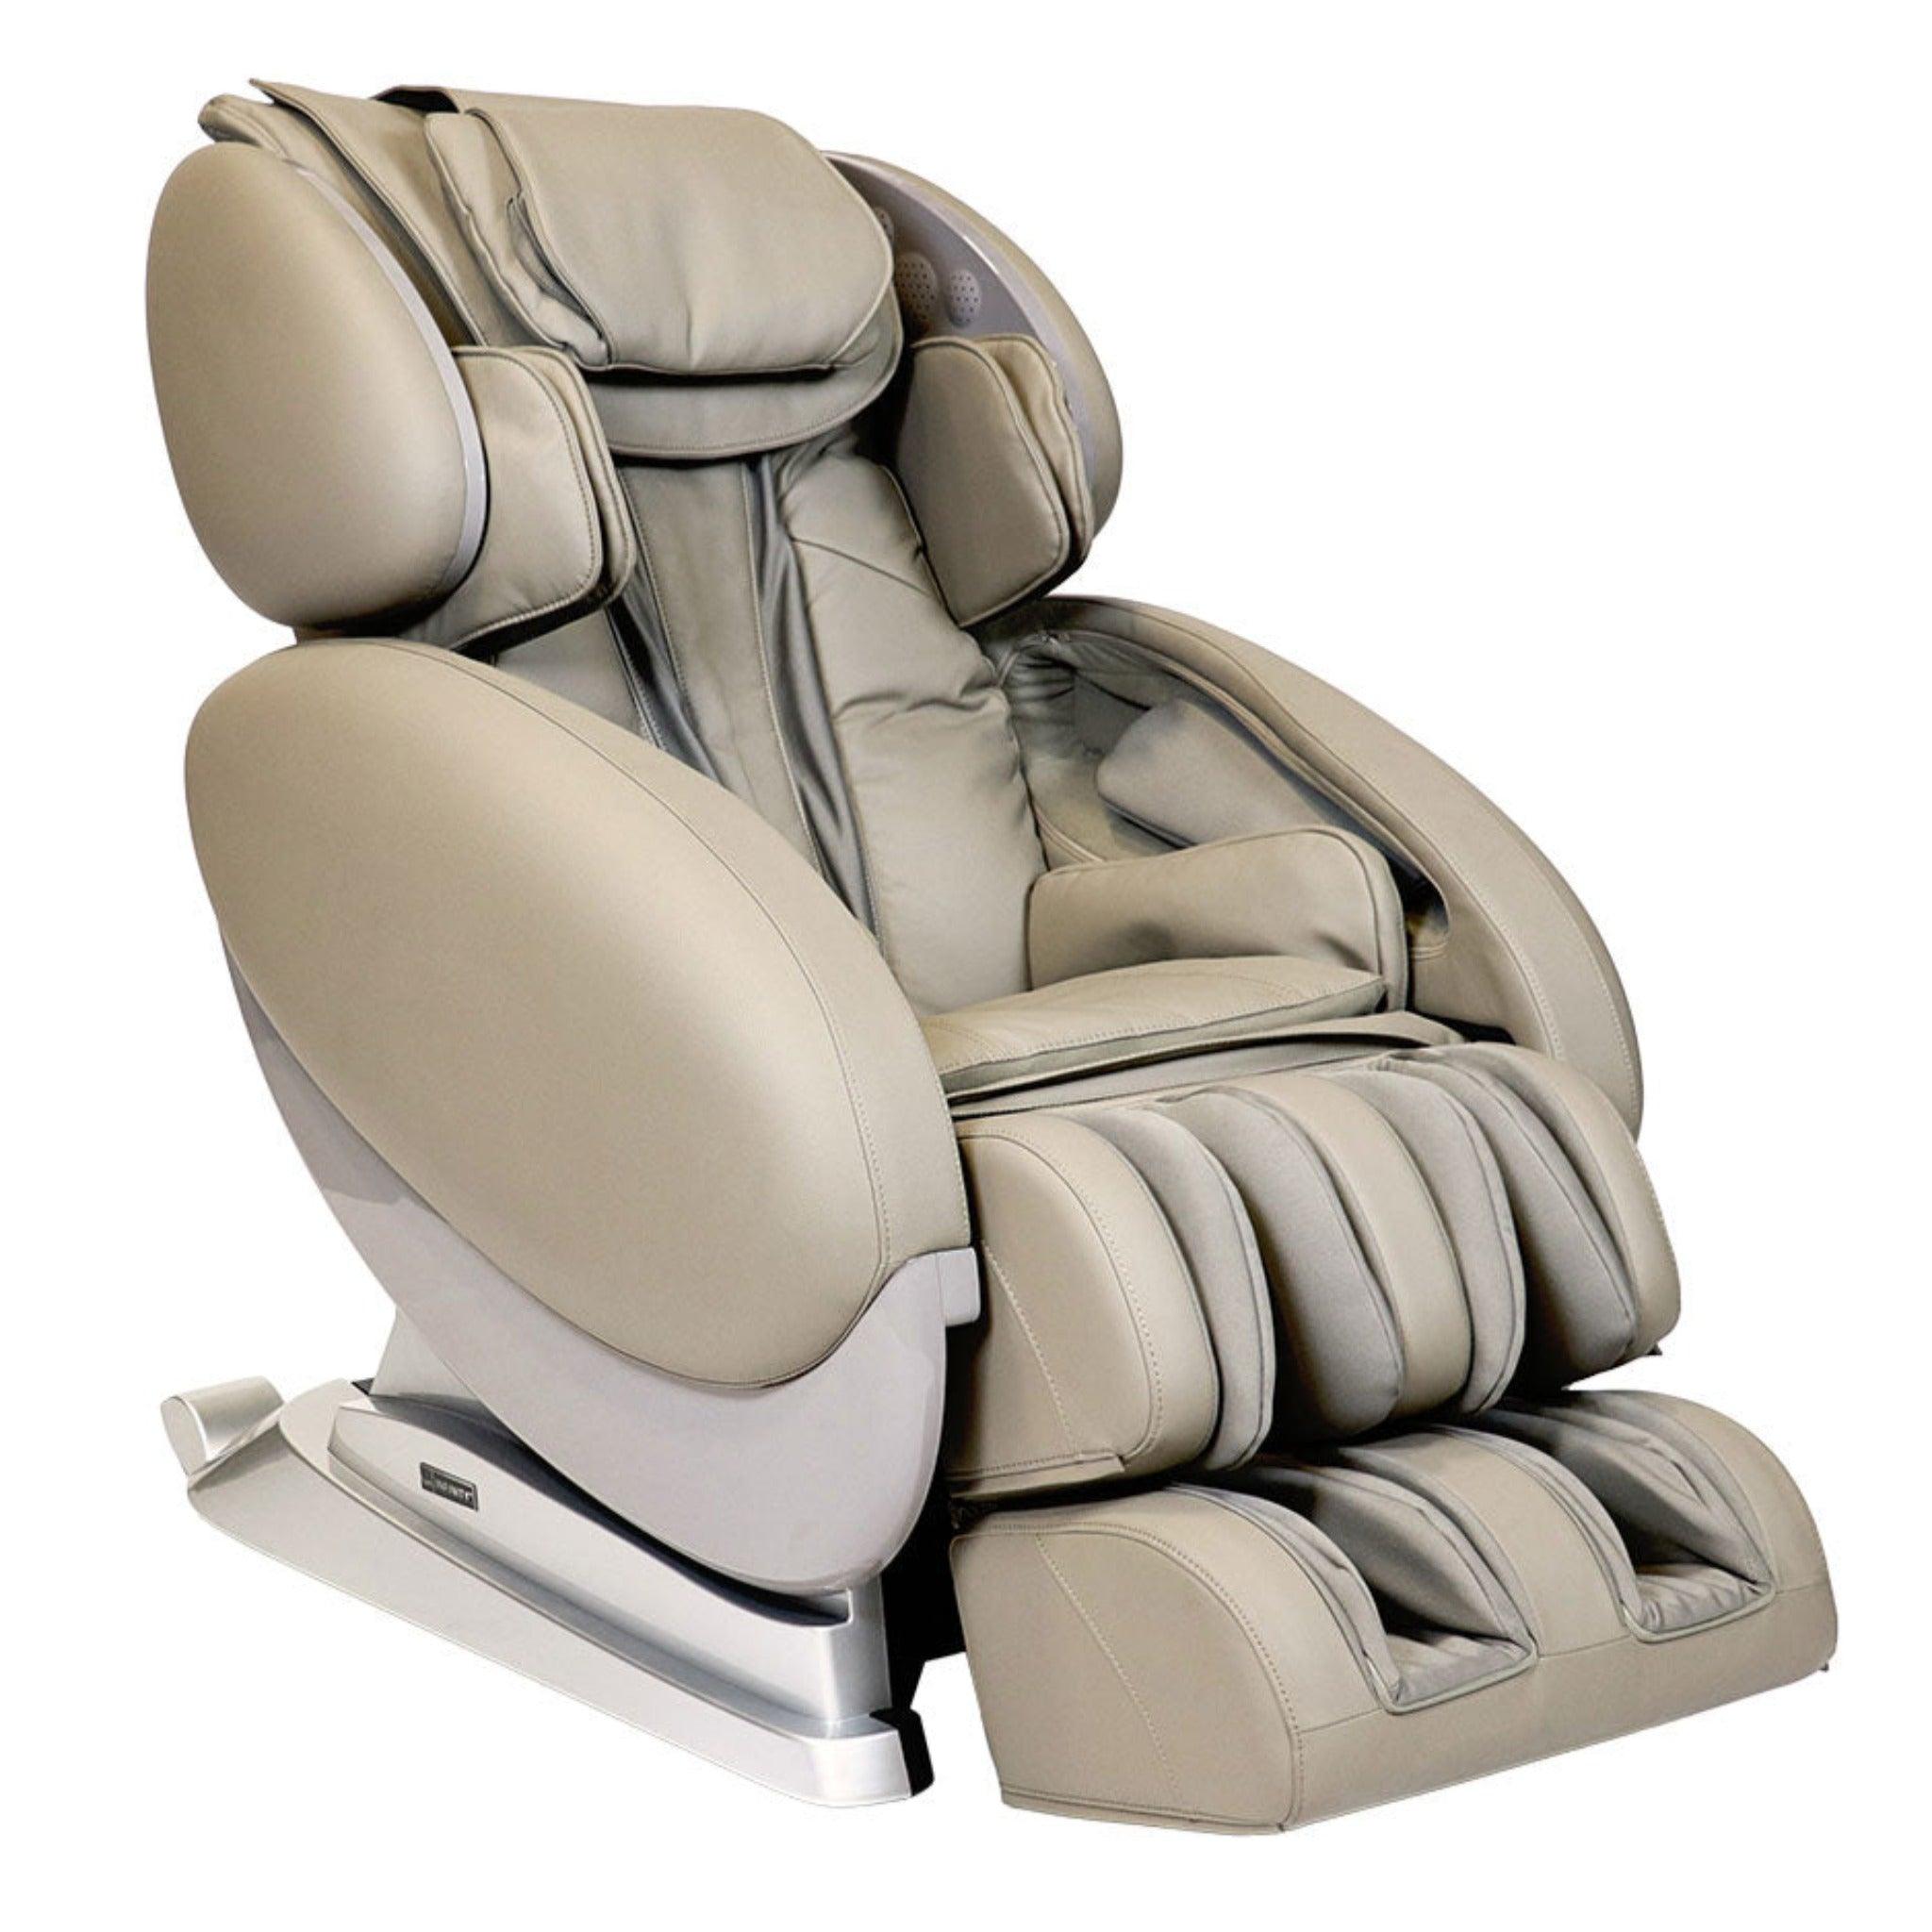 Infinity IT-8500 X3 Massage Chair | Certified Pre-owned